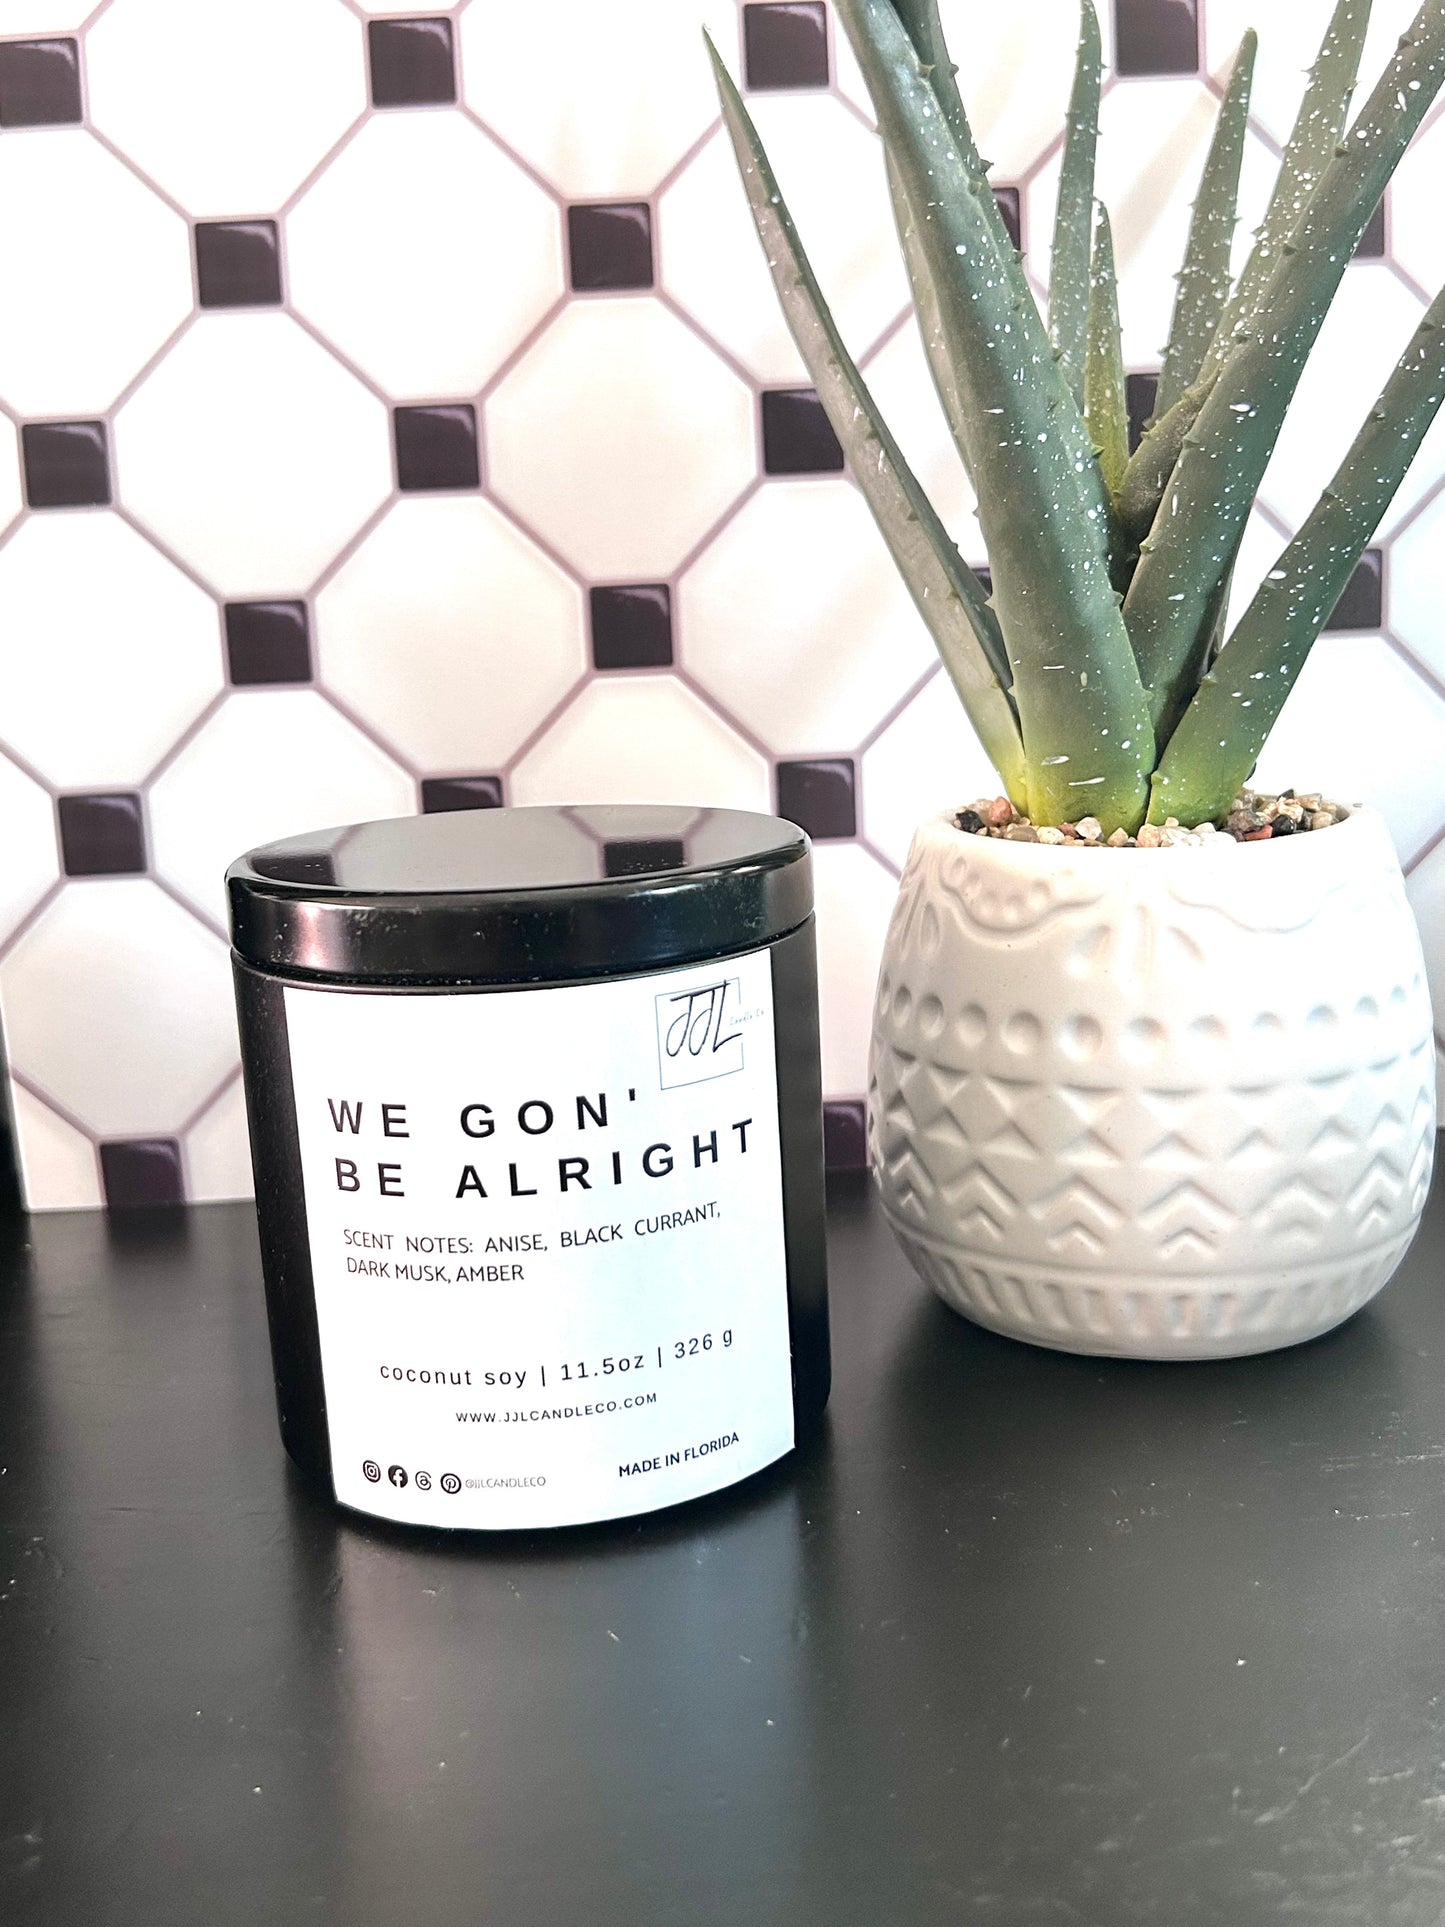 We Gon’ Be Alright - J.J.L. Candle Co.